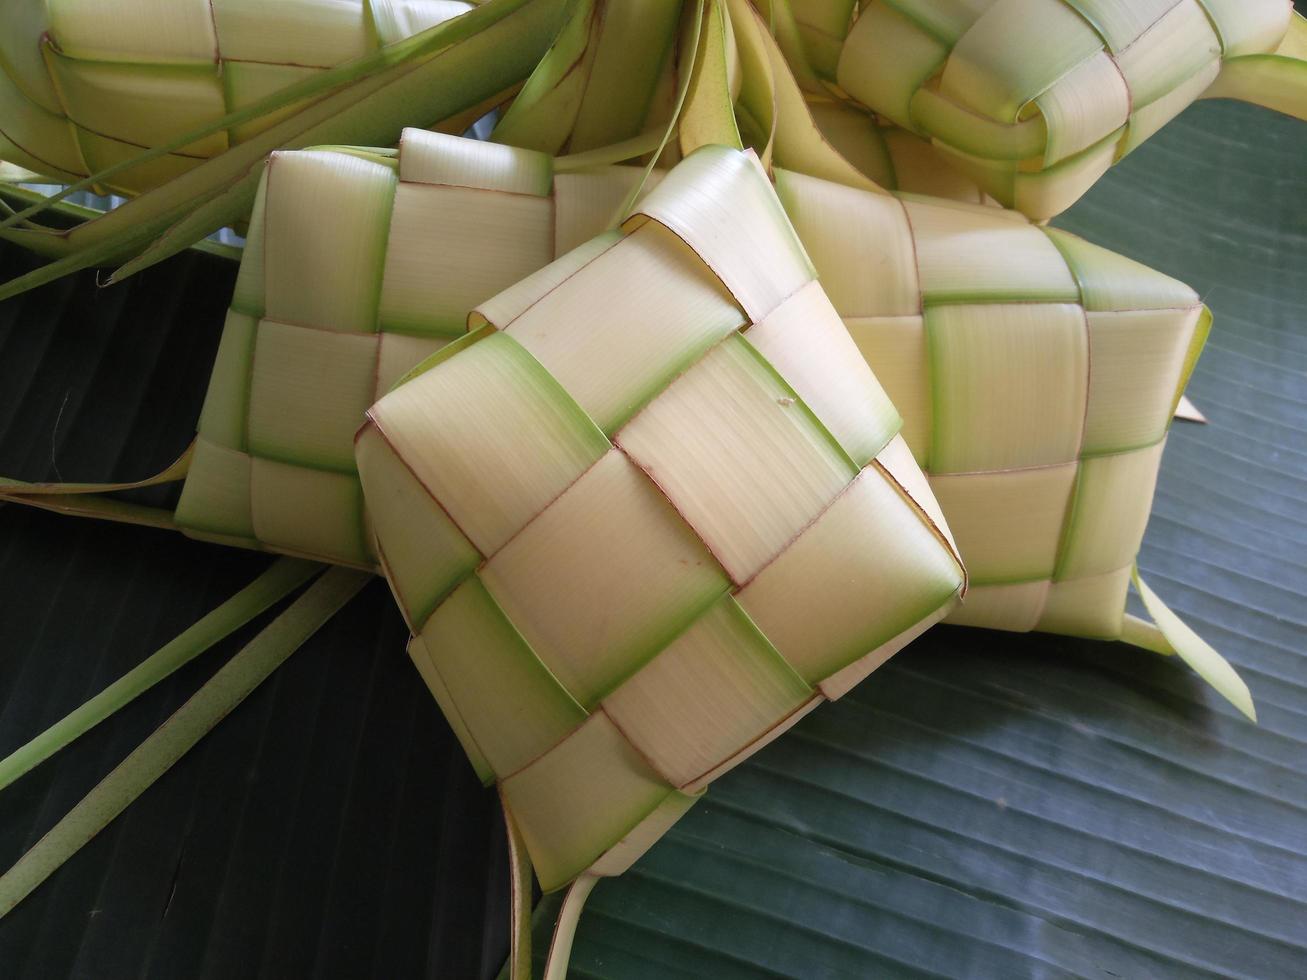 Ketupat in Indonesia is a kind of way of cooking rice by inserting rice into a coconut leaf which is shaped like a diamond. Then steamed. Very famous in Indonesia. Usually appears on Eid al-Fitr photo